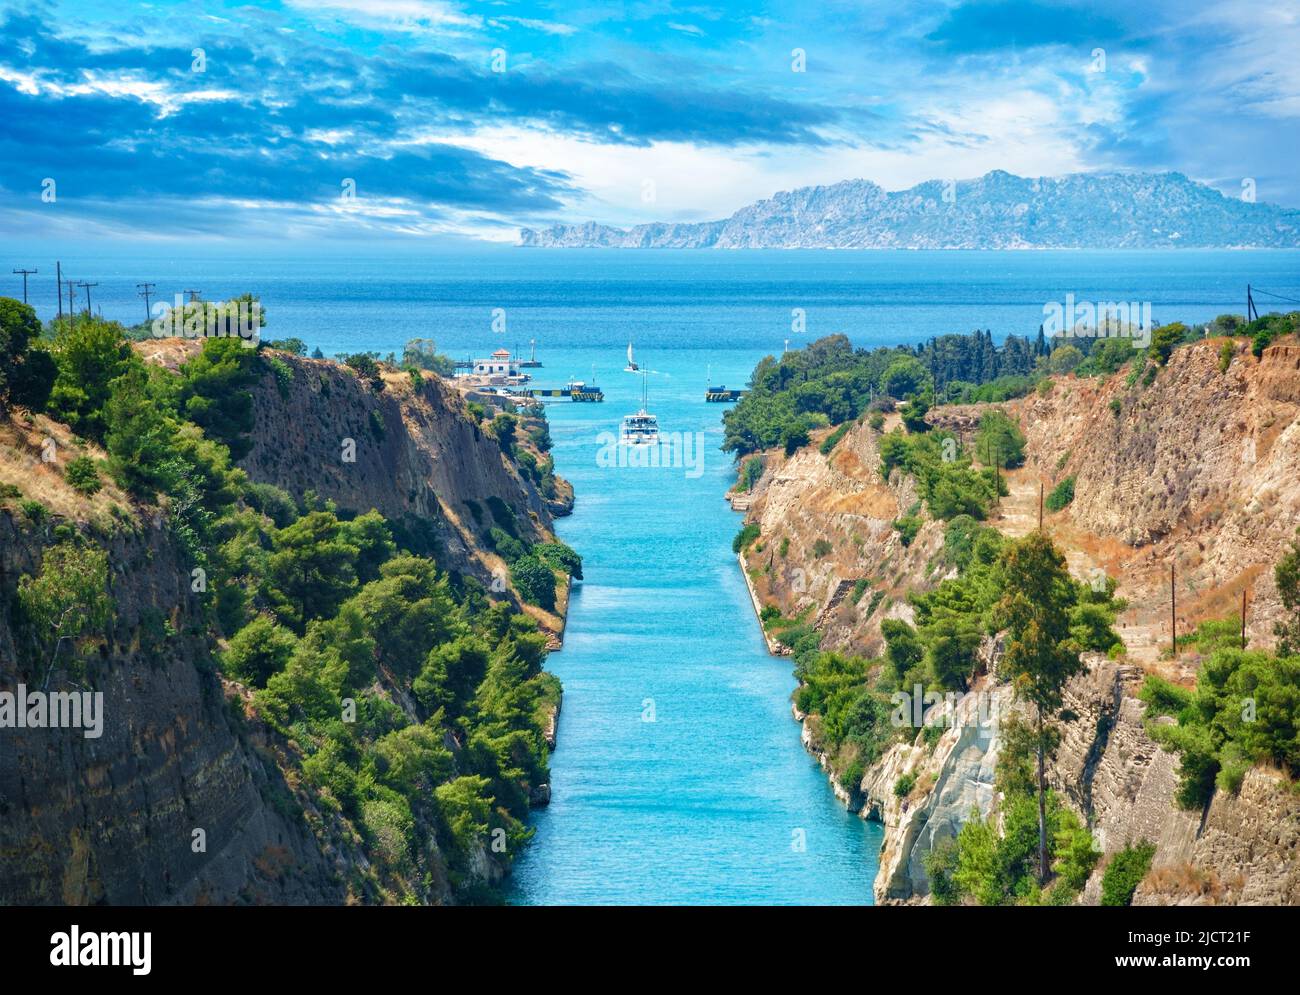 Beautiful landscape of the Corinth Canal in a bright sunny day against a blue sky with dramatic clouds. A pleasure boat floats among the rocks.Greece Stock Photo